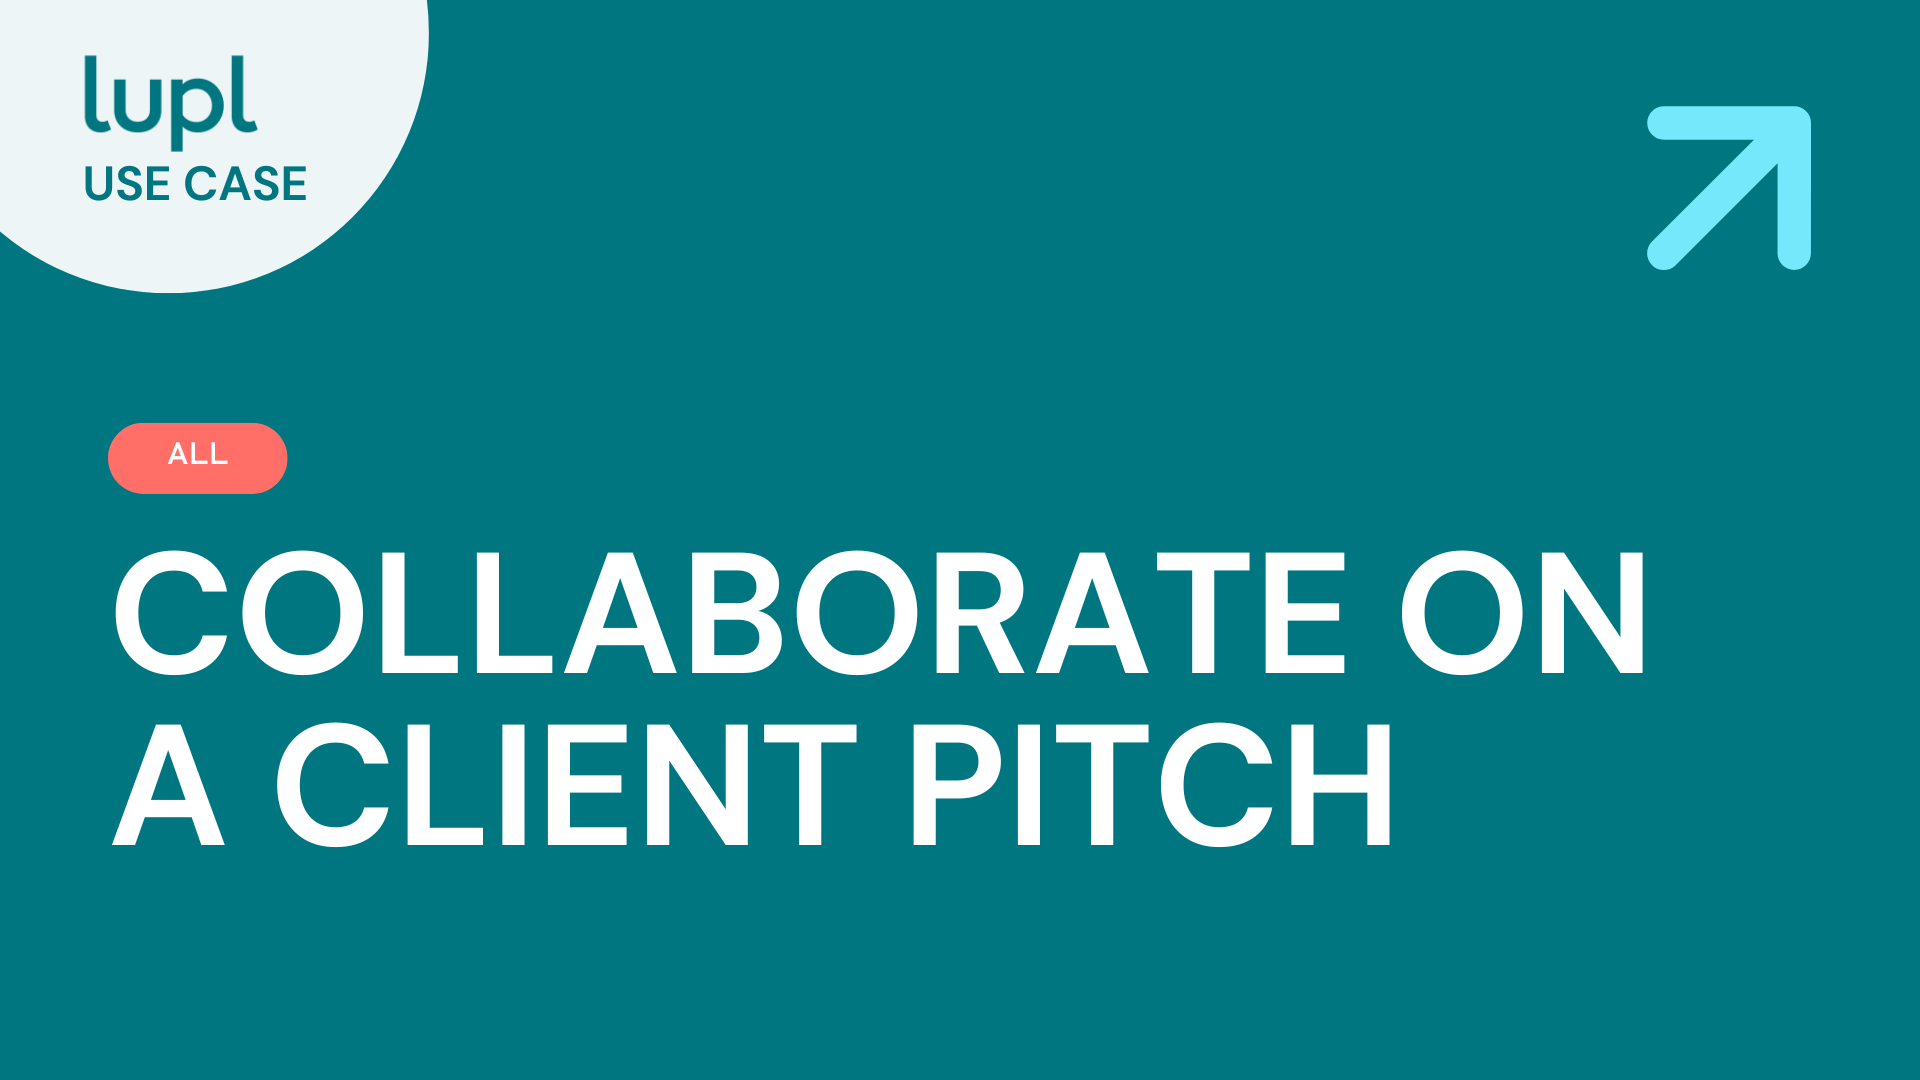 USE CASE - Collaborate on a client pitch